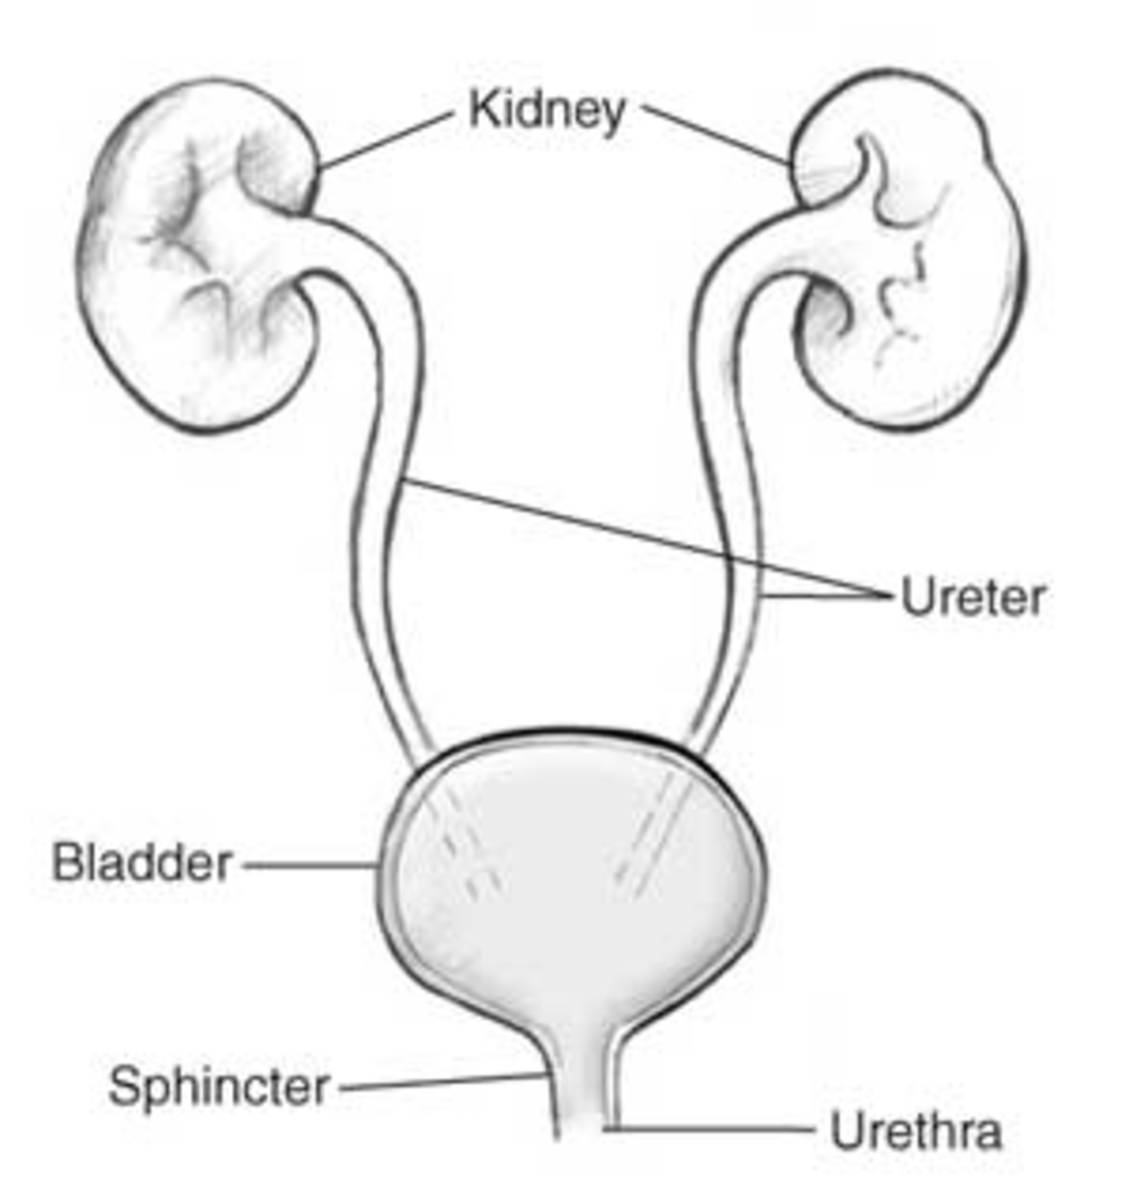 The two Kidneys, Ureter, Bladder and the Urethra all make up the Urinary system.